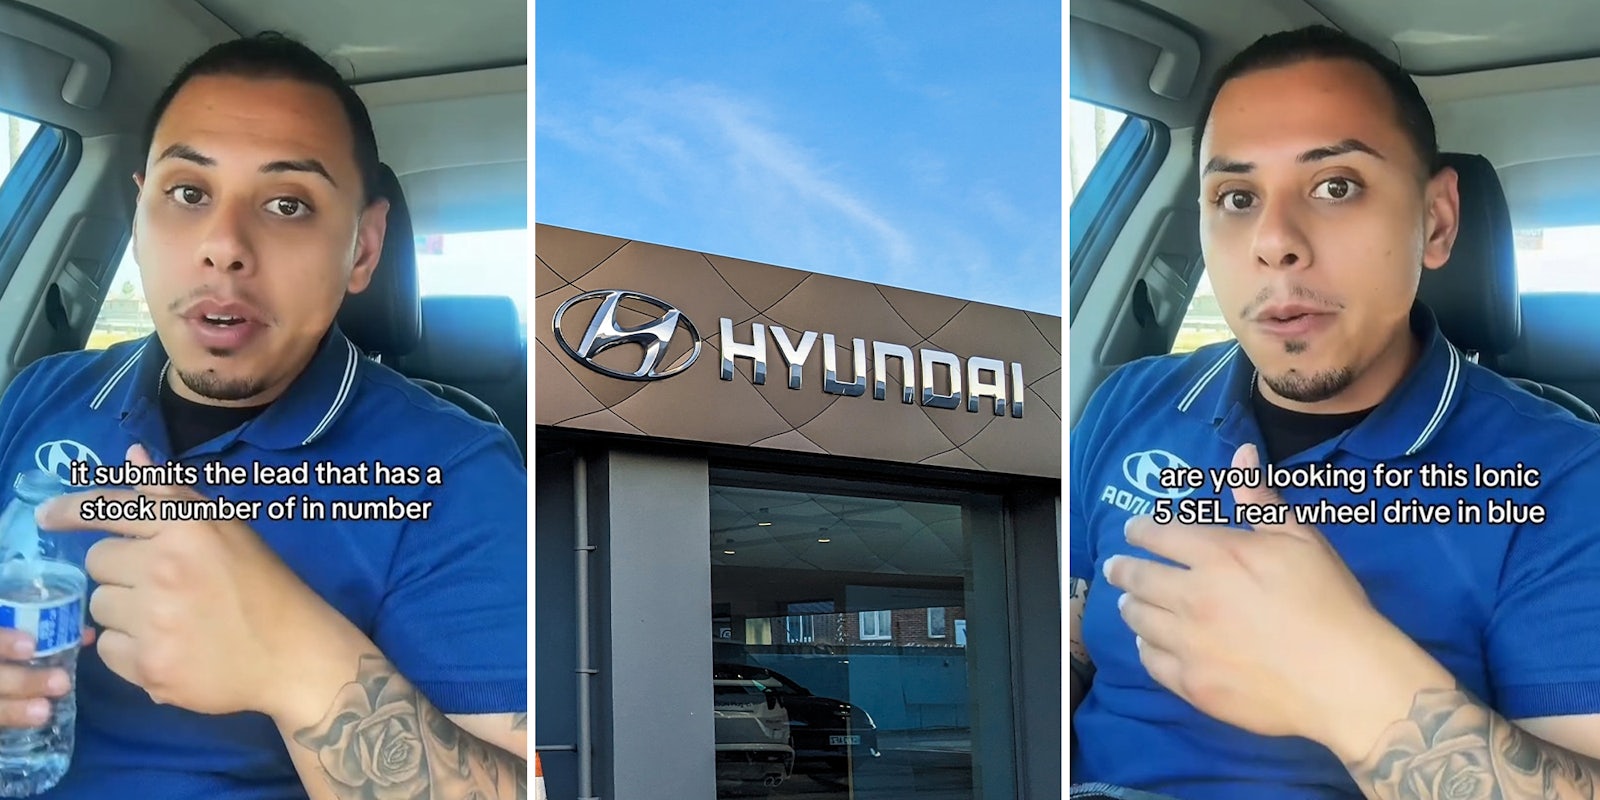 Hyundai dealership worker reveals what not to say if you want him to give you a deal